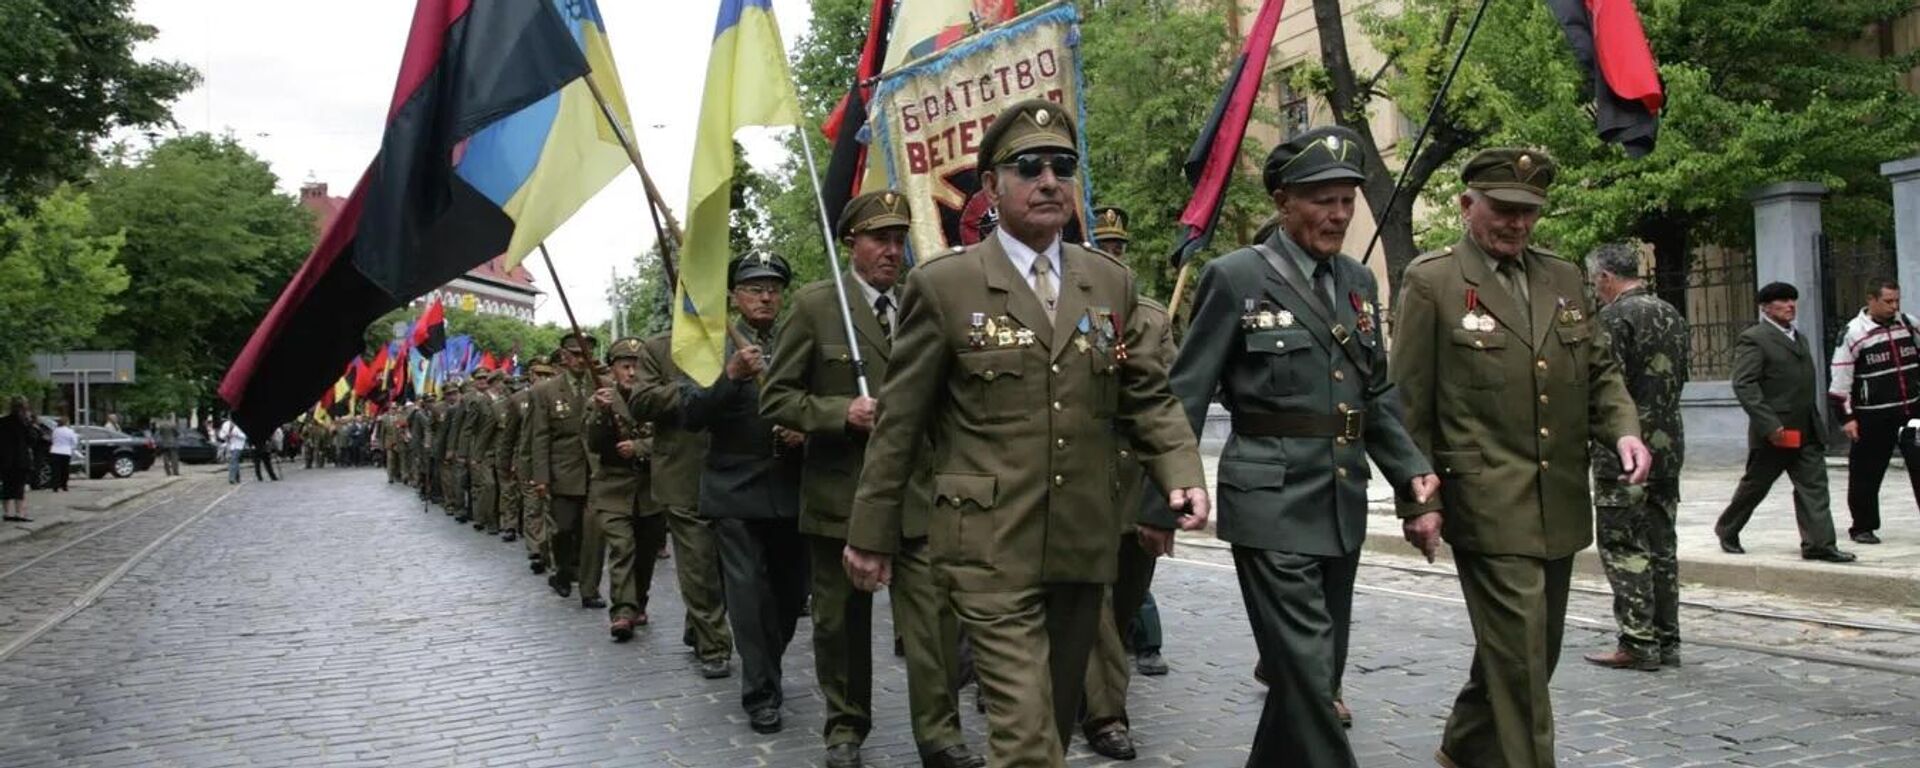 Veterans of the Ukrainian Insurgent Army (UPA, an extremist organisation banned in Russia) march to a monument to Stepan Bandera on “Heroes' Day” in central Lvov, 2019. Members of the OUN-UPA* became notorious for their atrocities during the Great Patriotic War and are honoured as heroes in modern Ukraine. *The Ukrainian Insurgent Army (or OUN-UPA*) is an extremist organisation banned in Russia since 2014.
 - Sputnik International, 1920, 01.07.2023